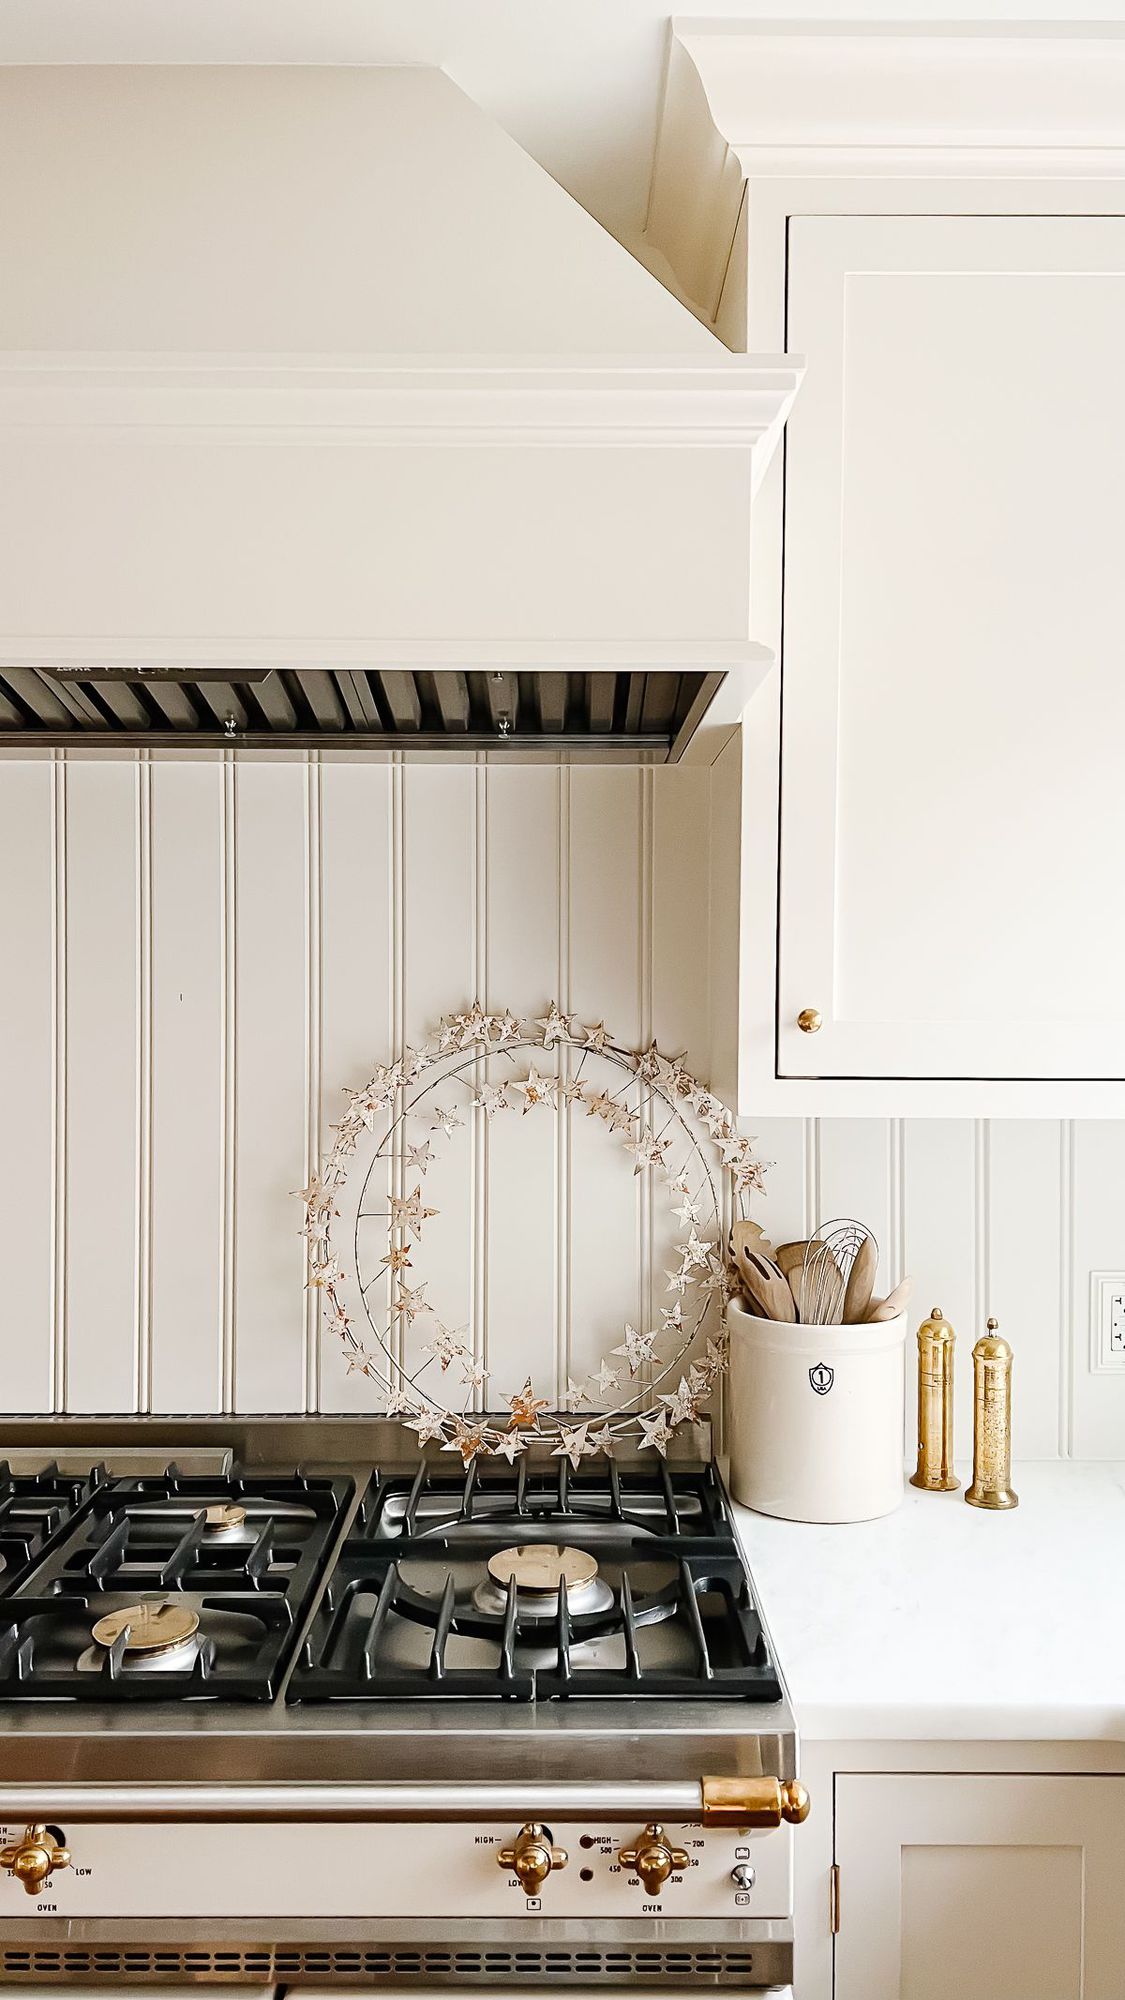 A wreath of metal stars leaning against a backsplash in a cream-colored kitchen